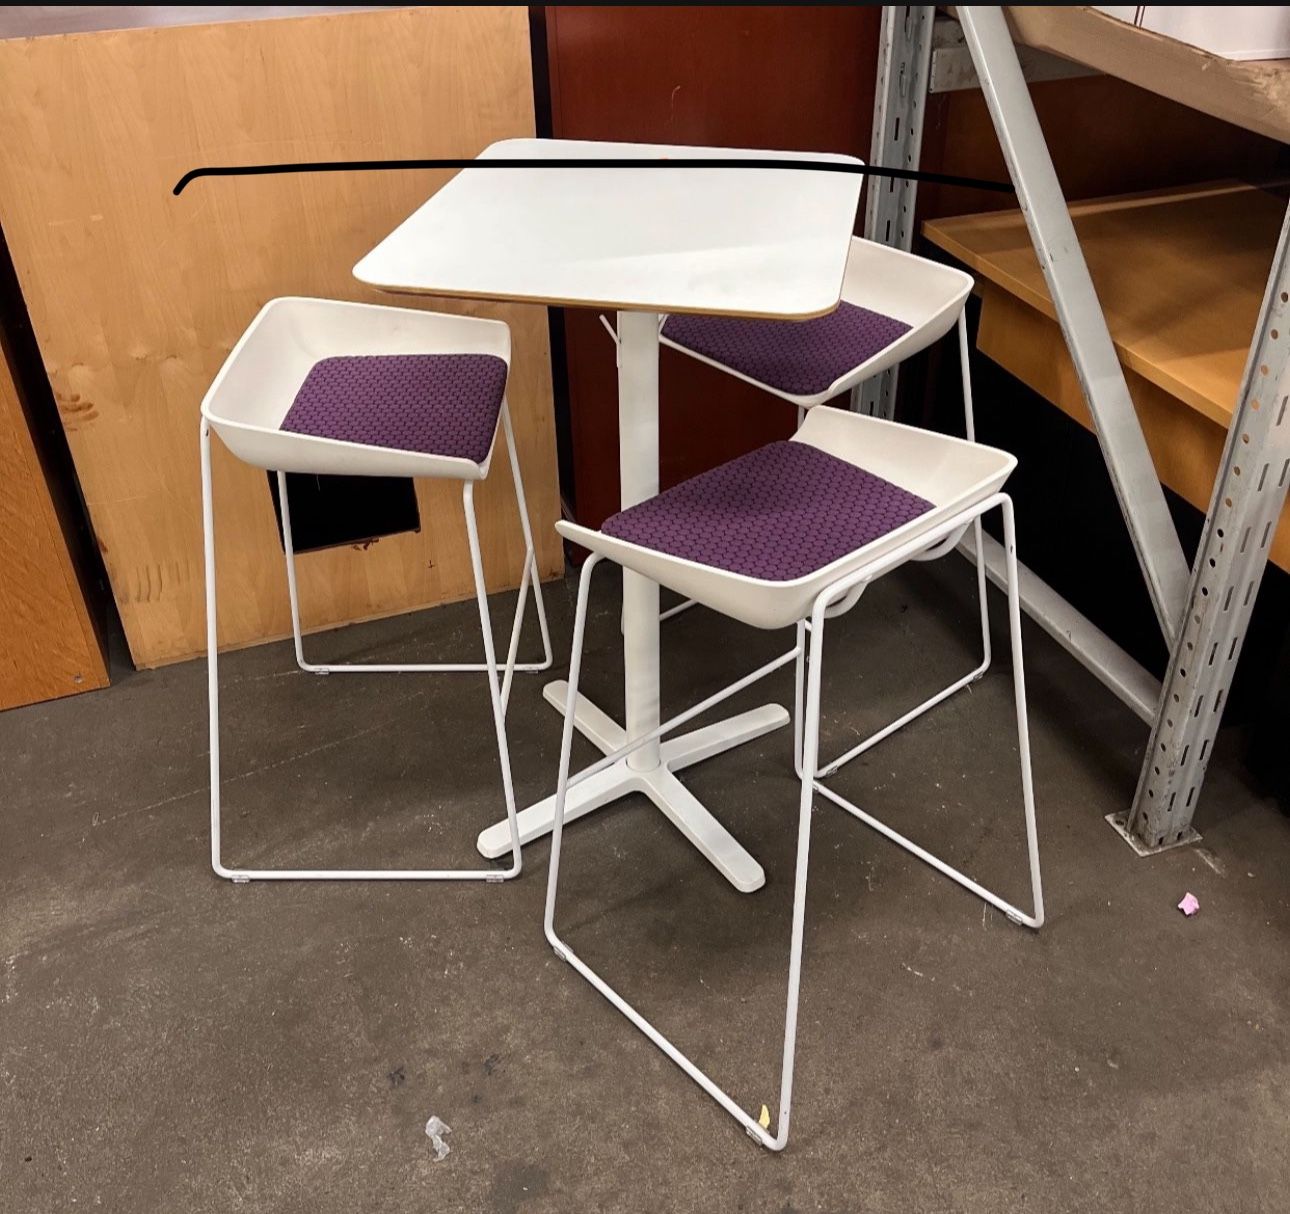 Stools By Steelcase Chairs 